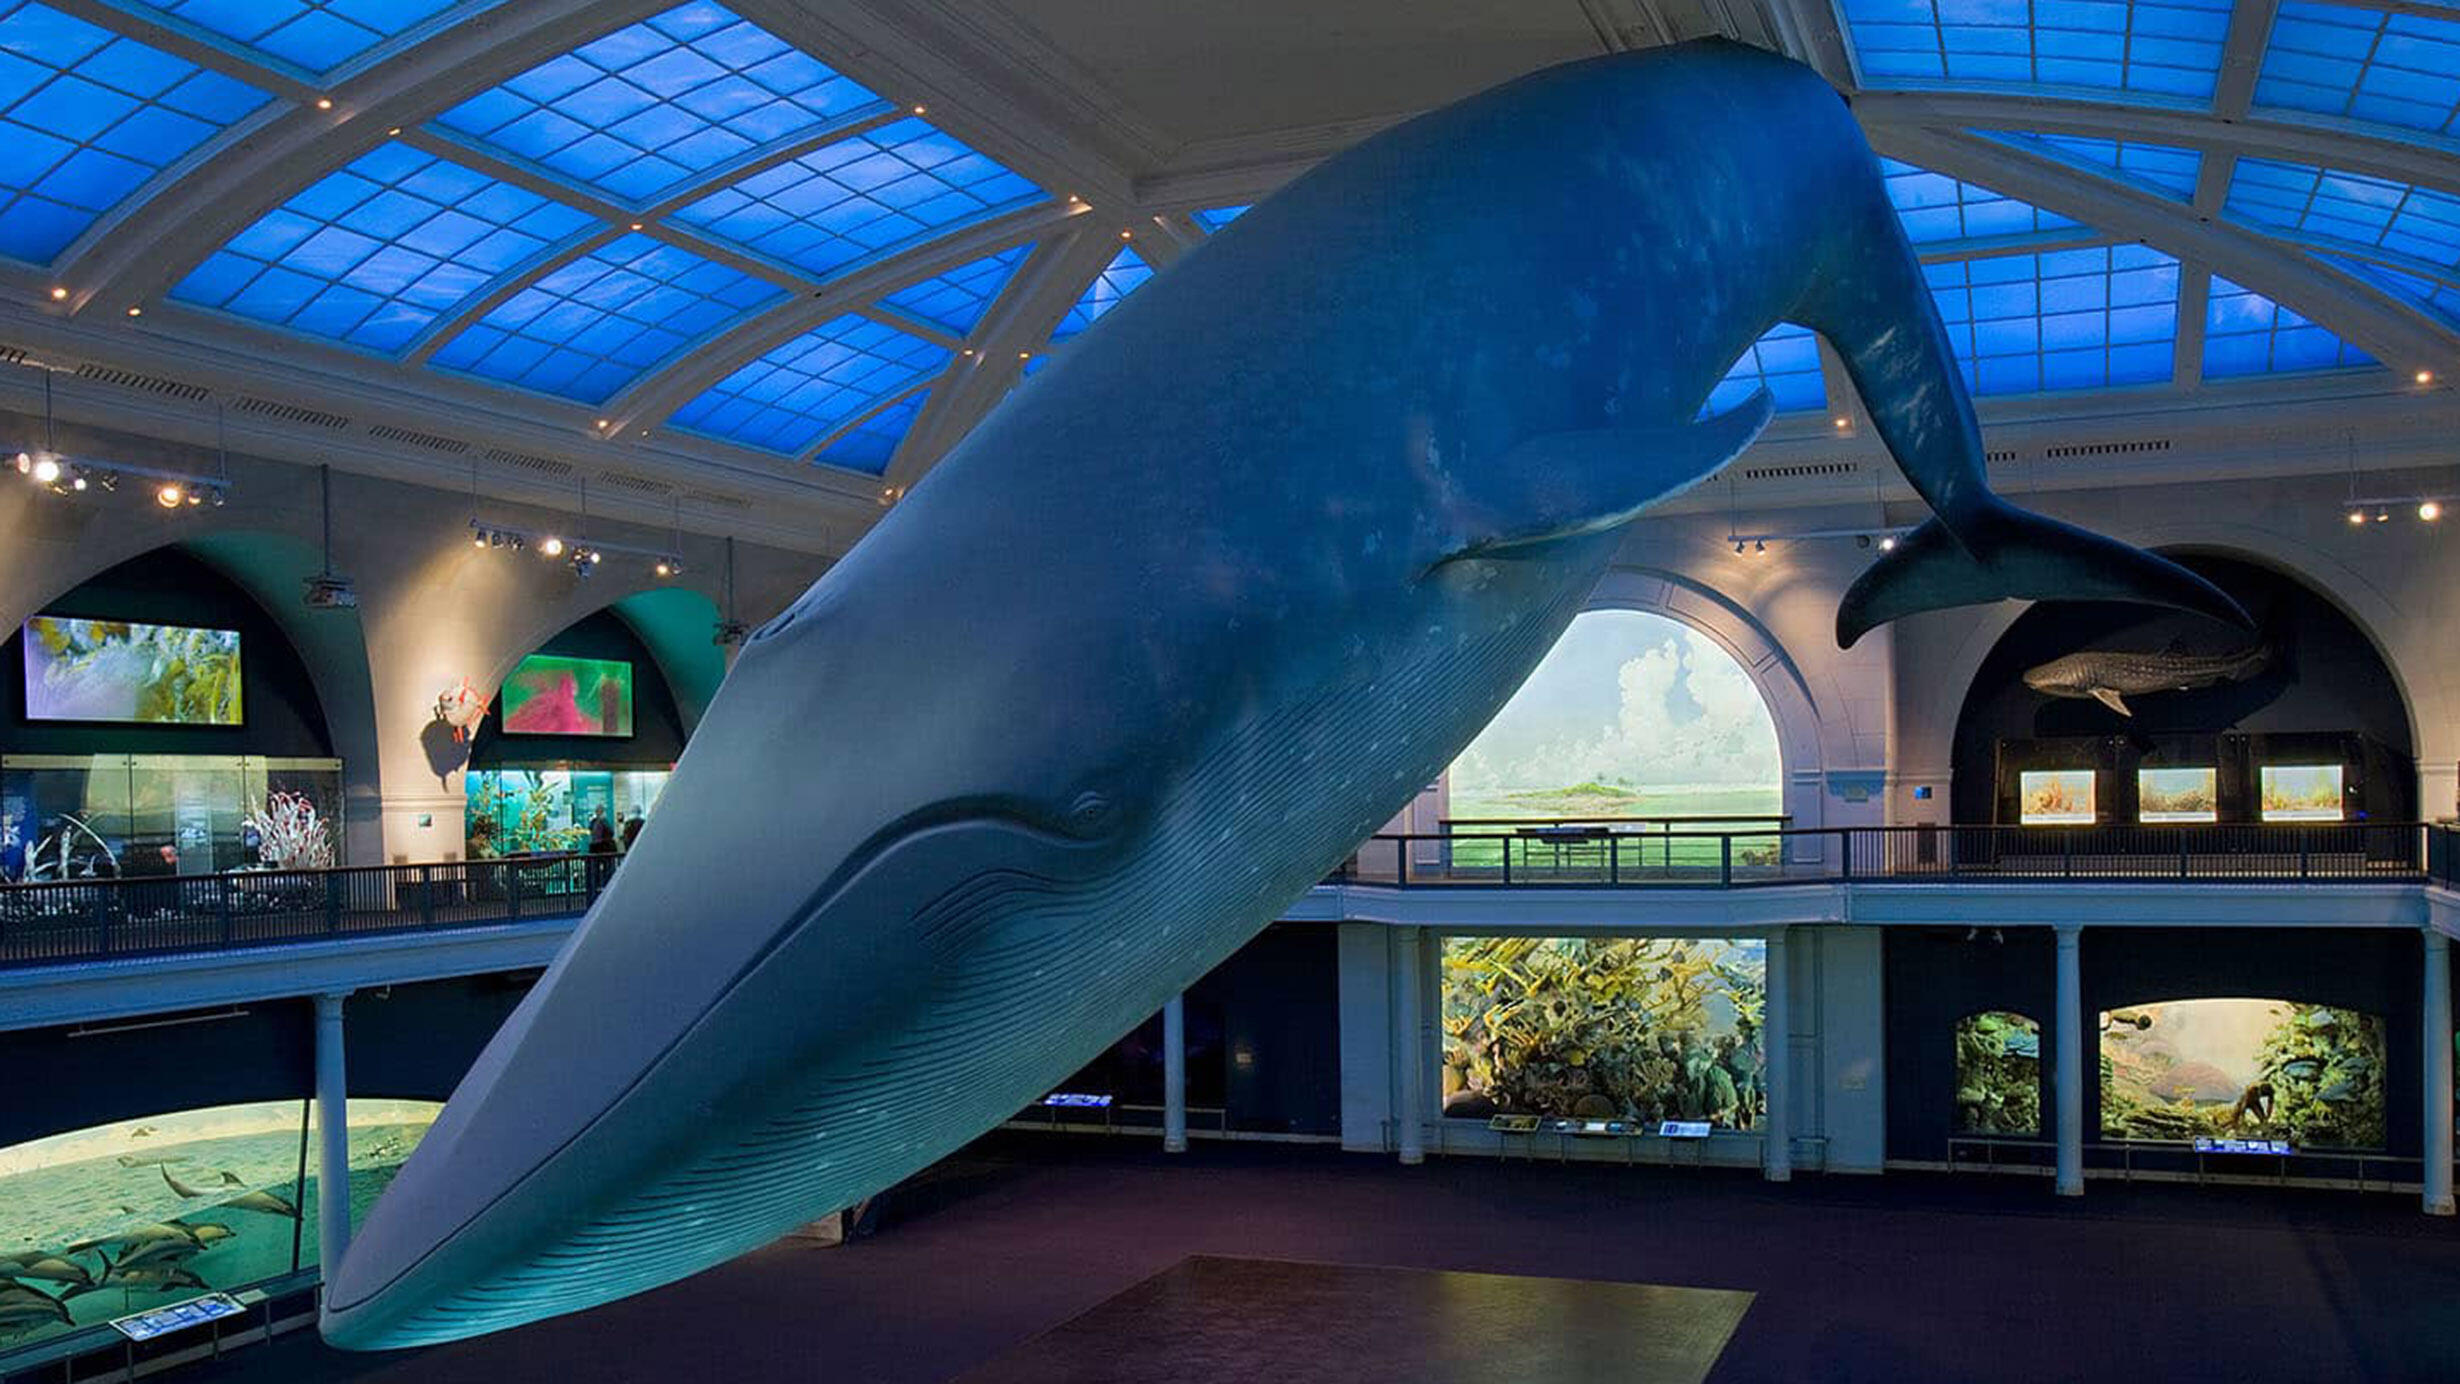 94 foot long fiberglass model of a female blue whale is suspended from the ceiling of the Milstein Hall of Ocean Life.